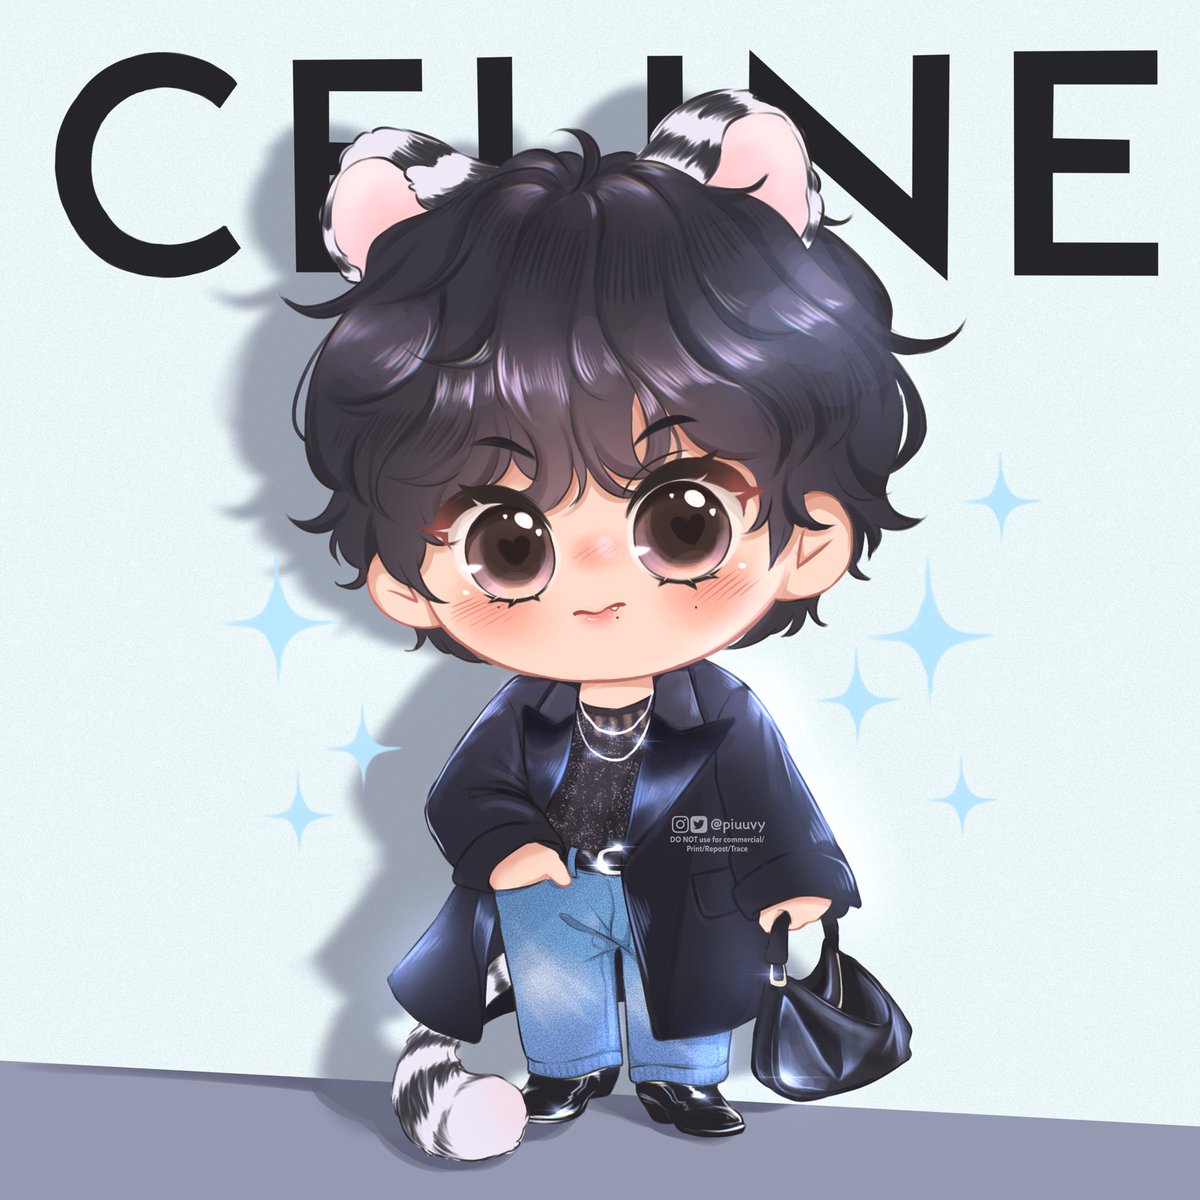 「Waiting for gorgeous Celine boy CELINE G」|Piuuvy⁷ 🐻 TAEKOOK DAY🔥のイラスト